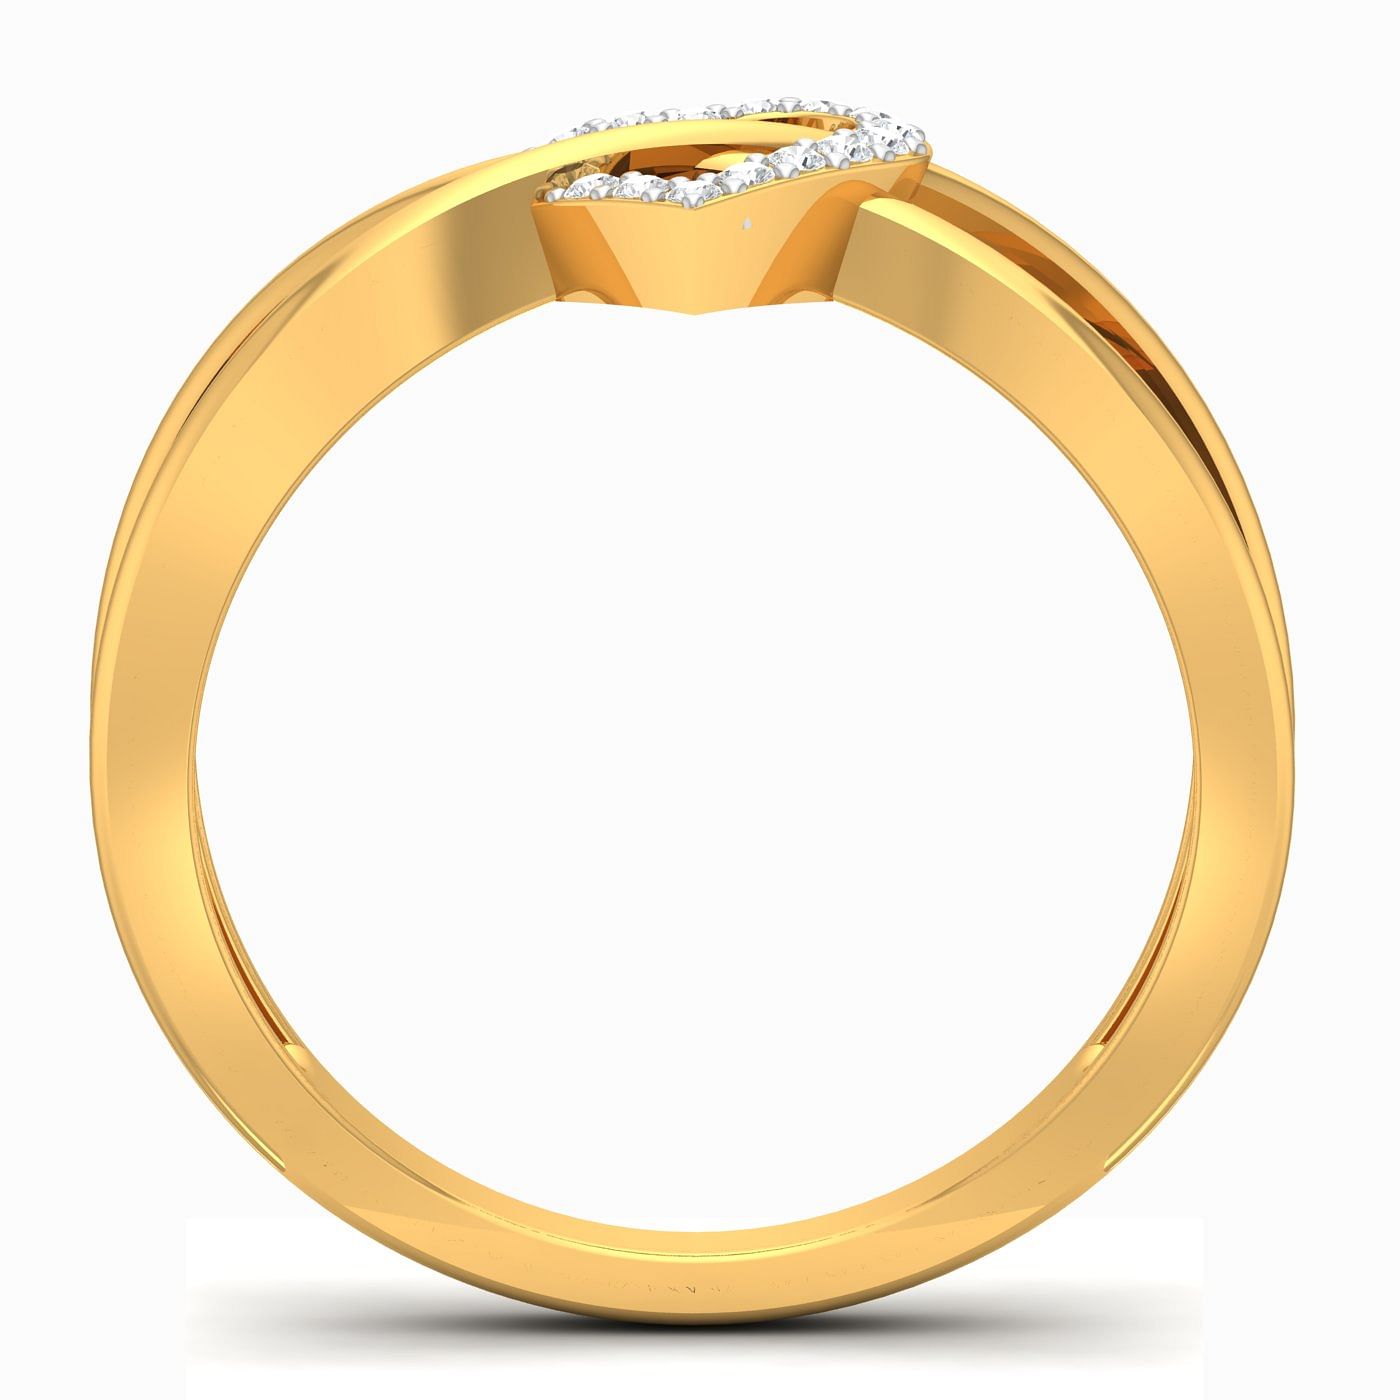 Diamond Heart Promise Ring Yellow Gold For Anniversary Gift